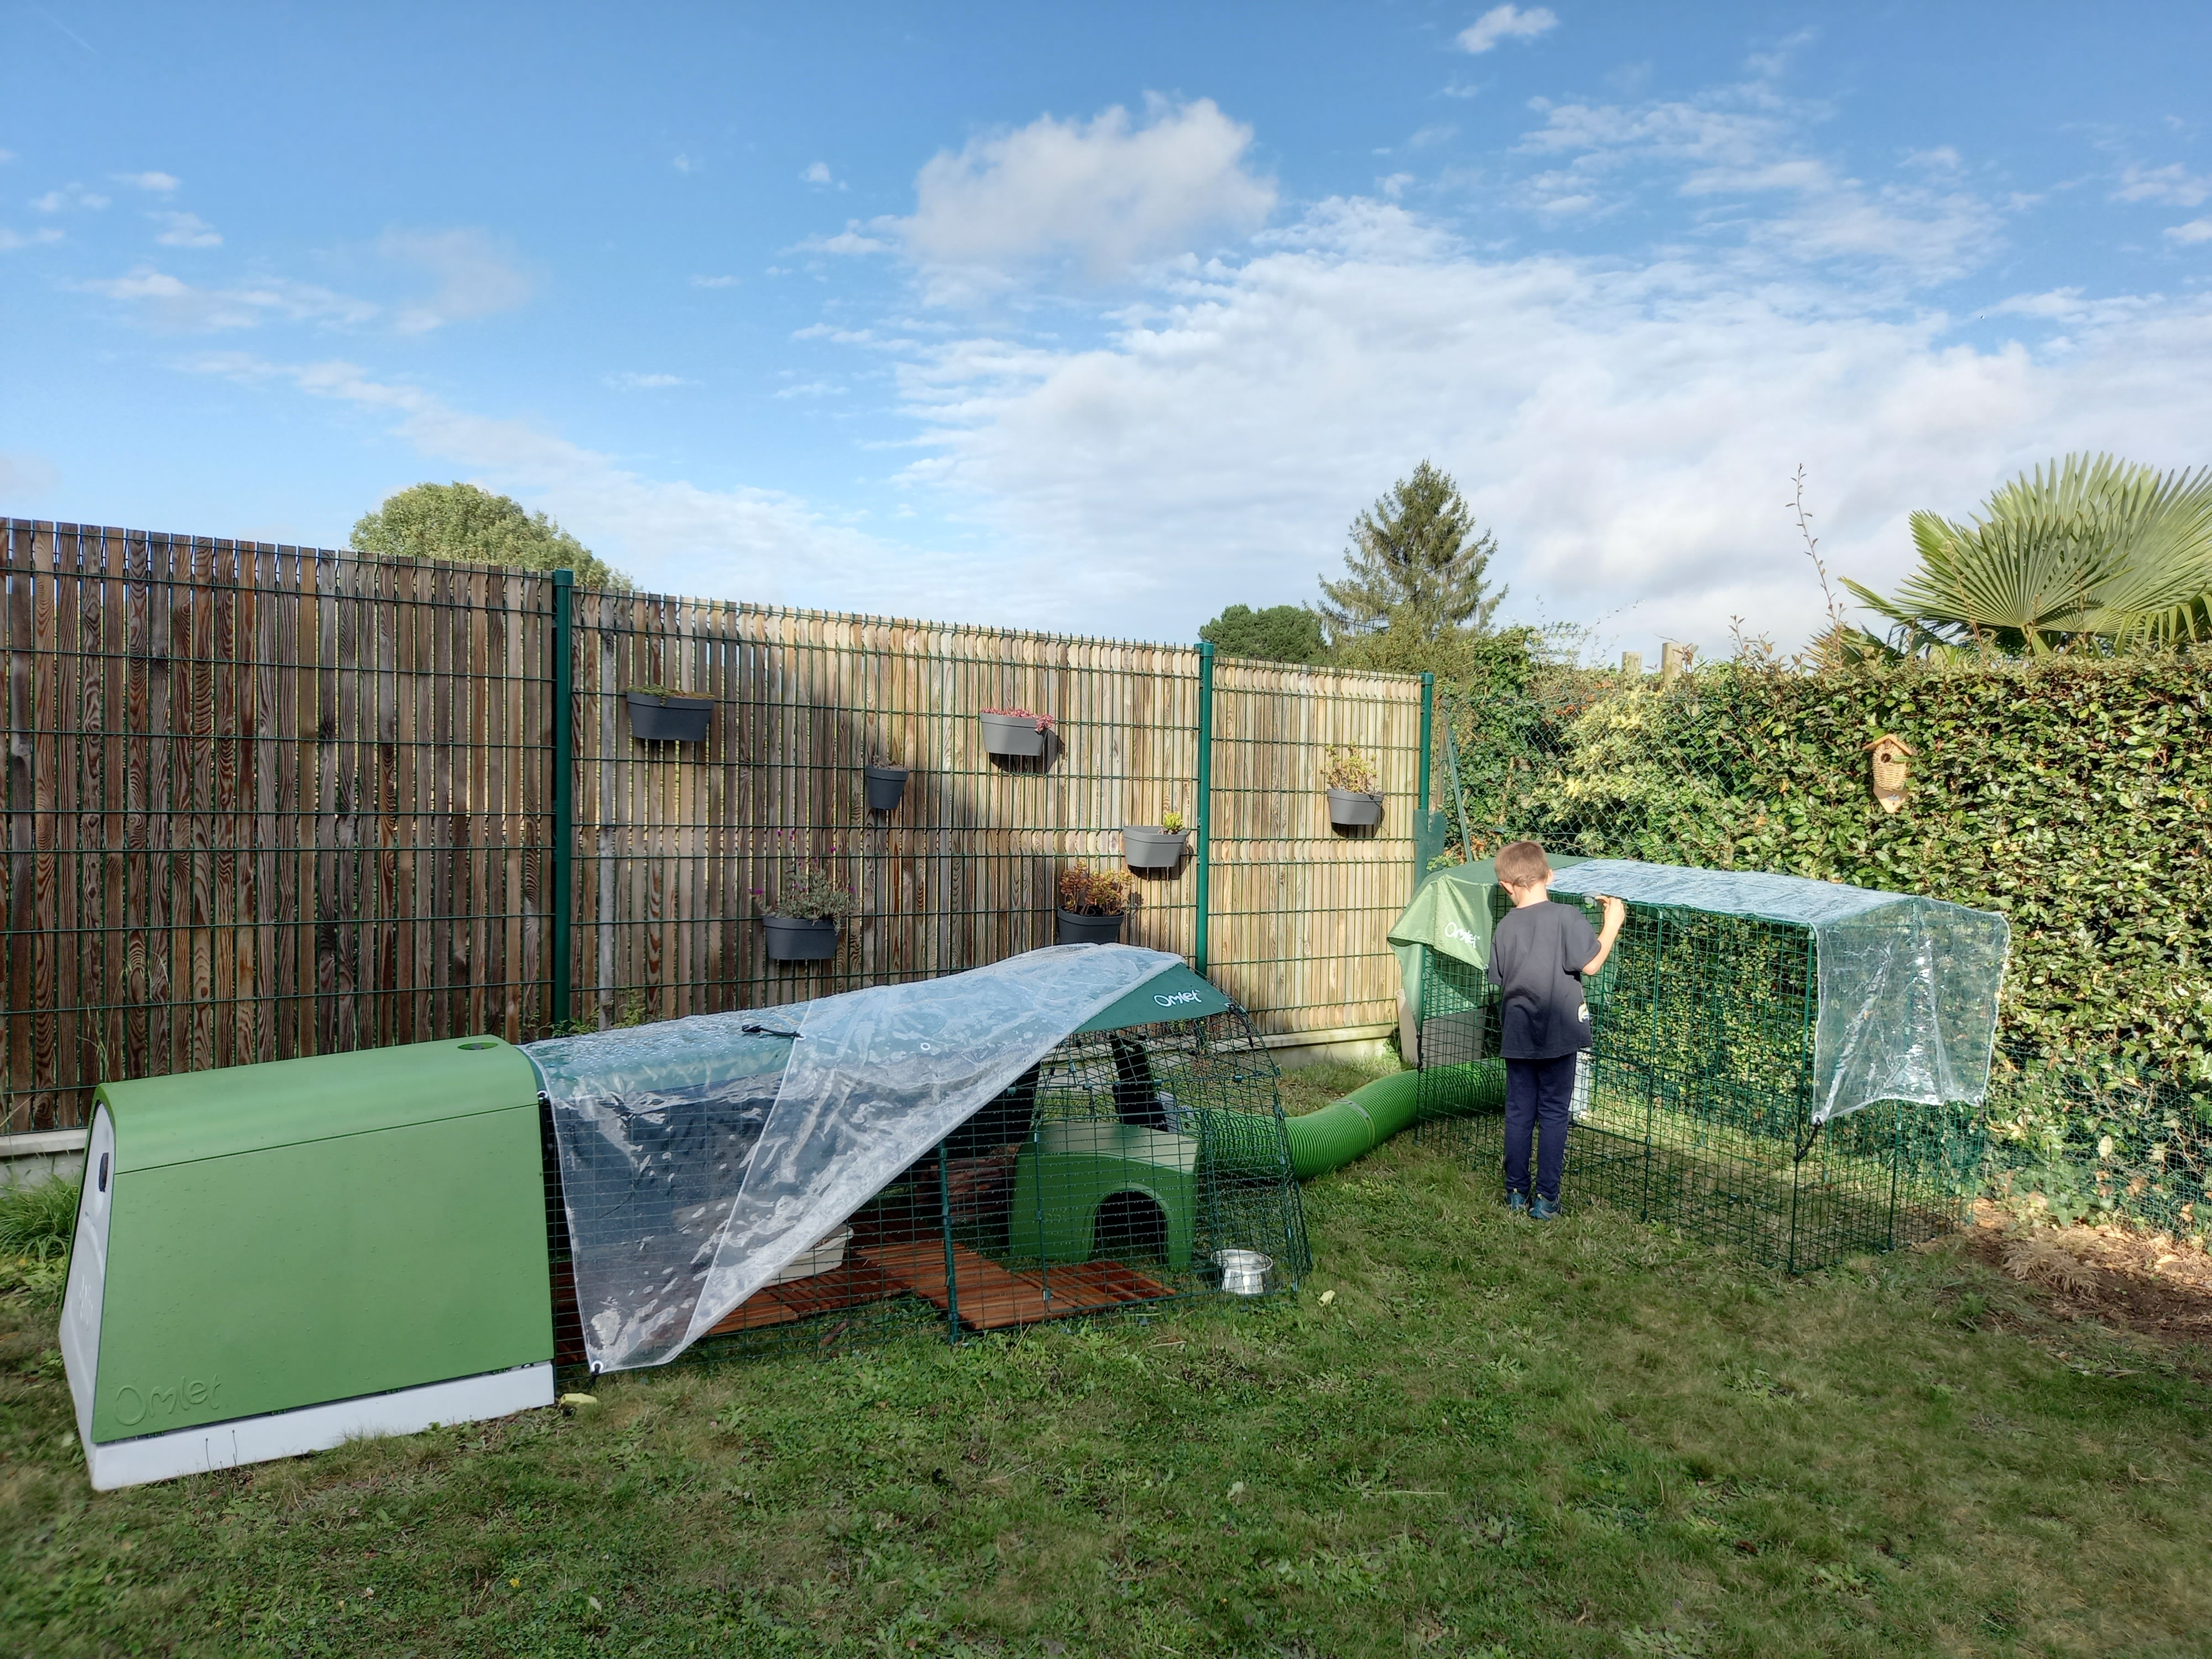 A chicken coop with a run, connected to a another enclosure with a green tunnel